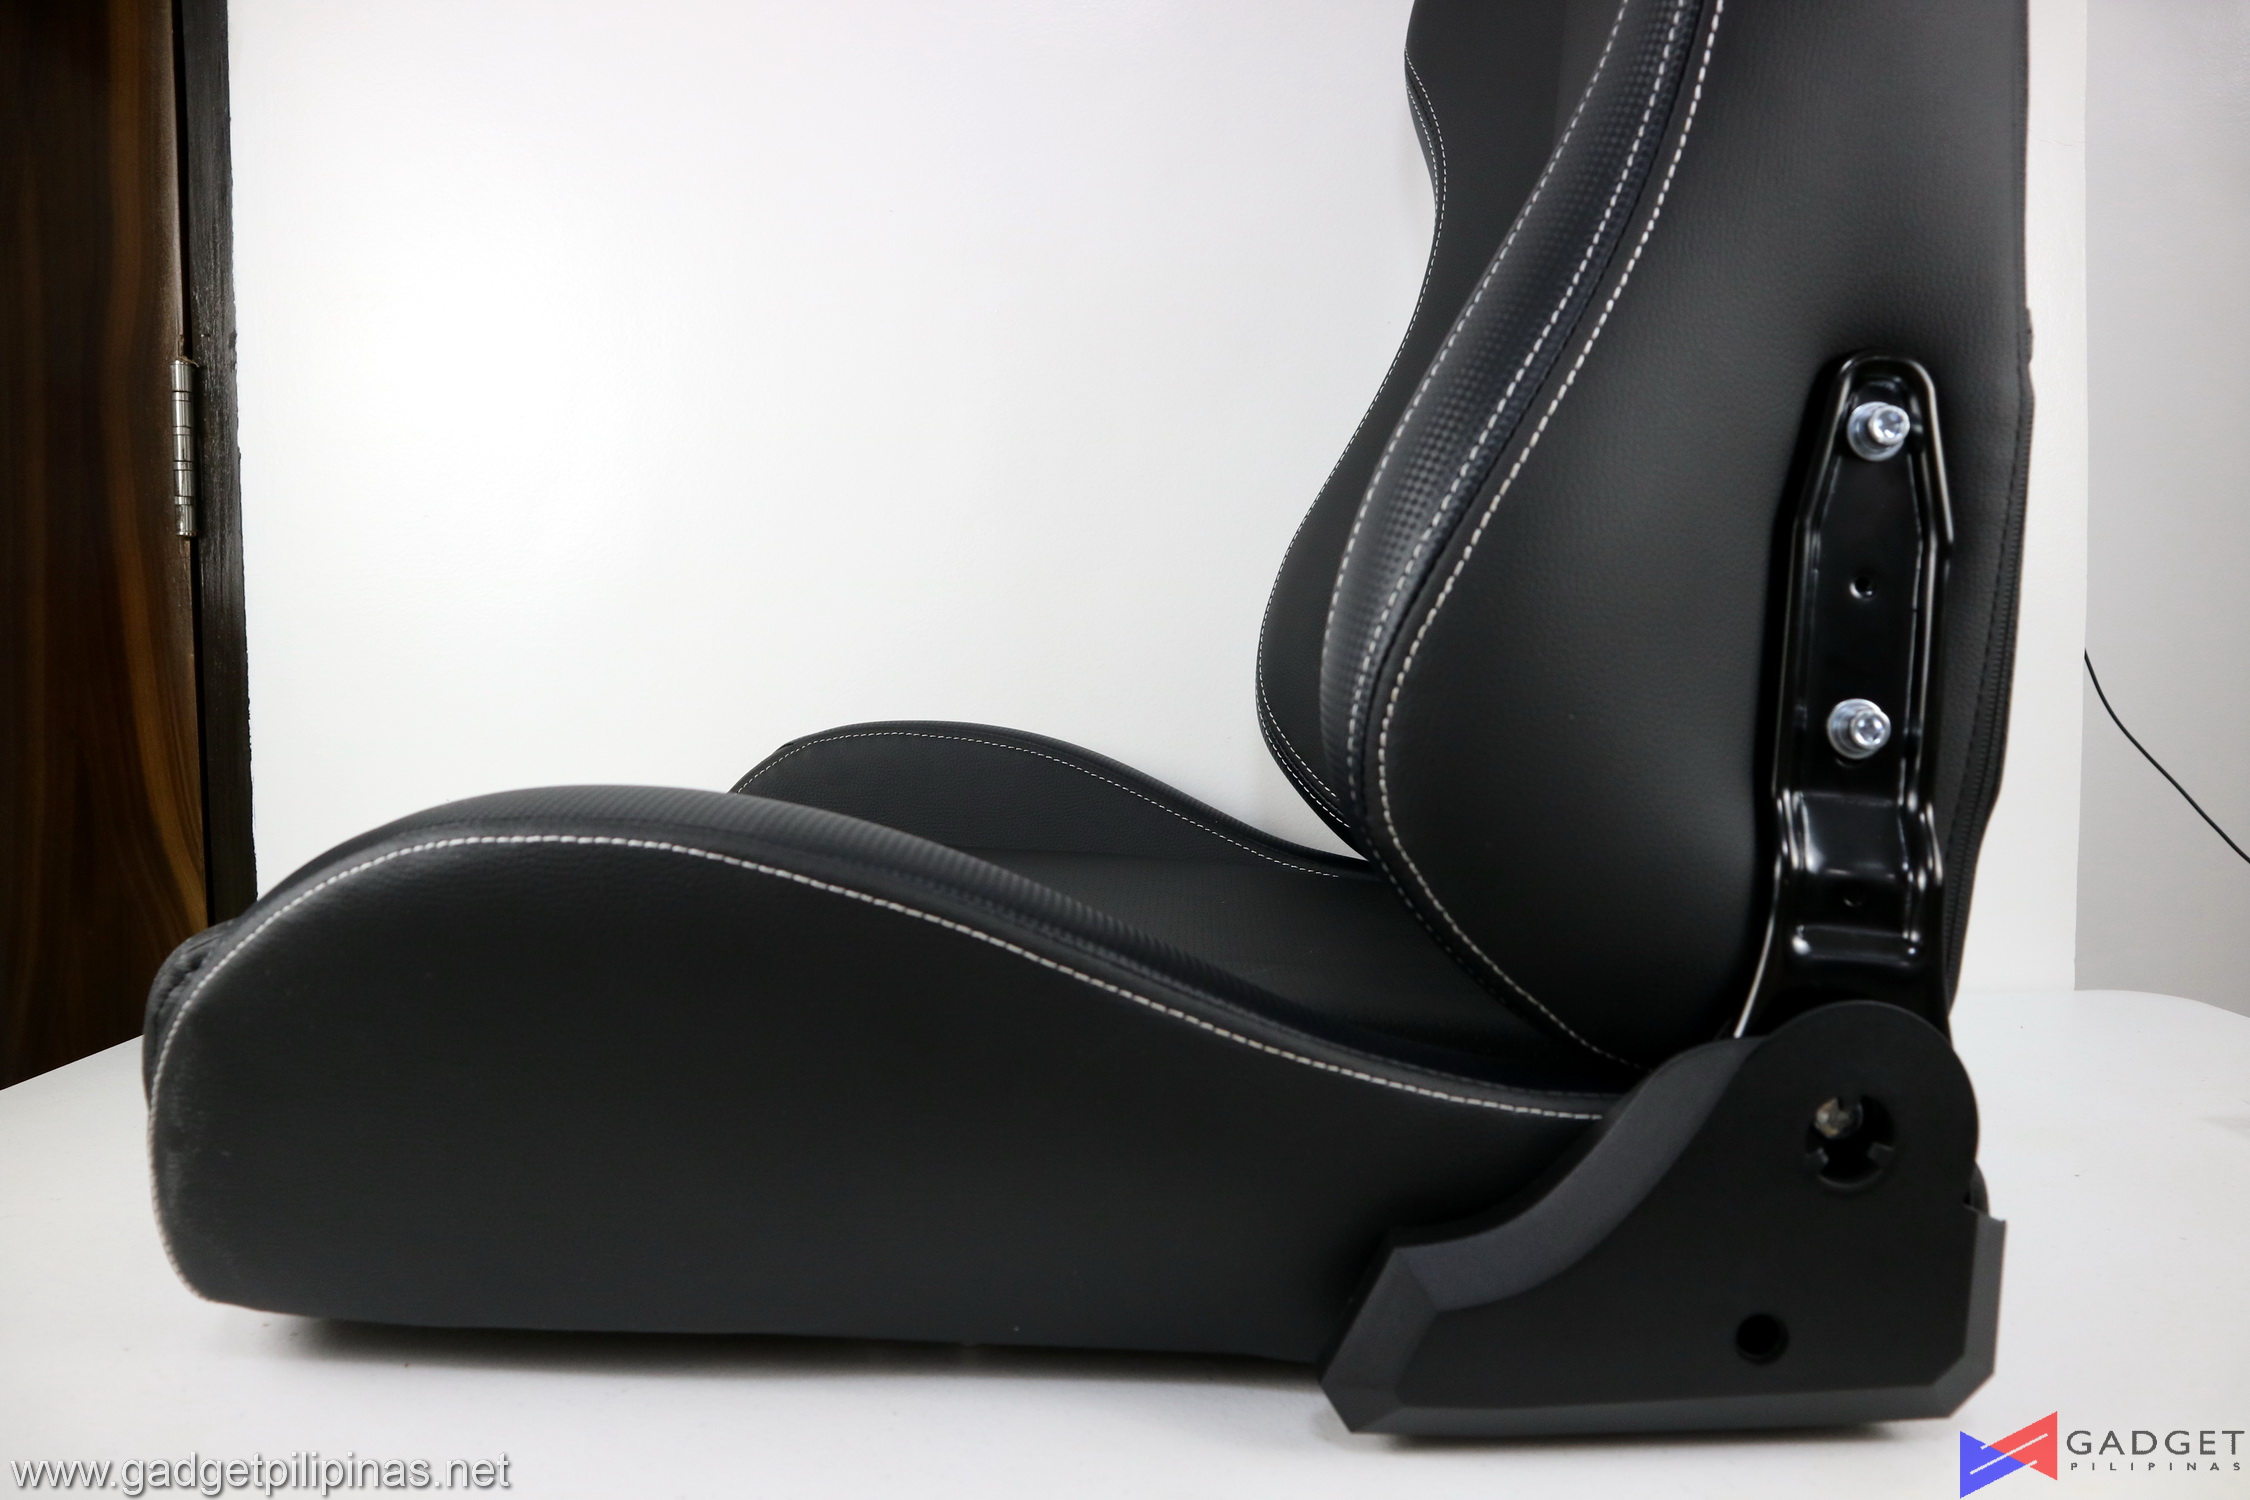 Player One Ghost v2 Gaming Chair Review 074